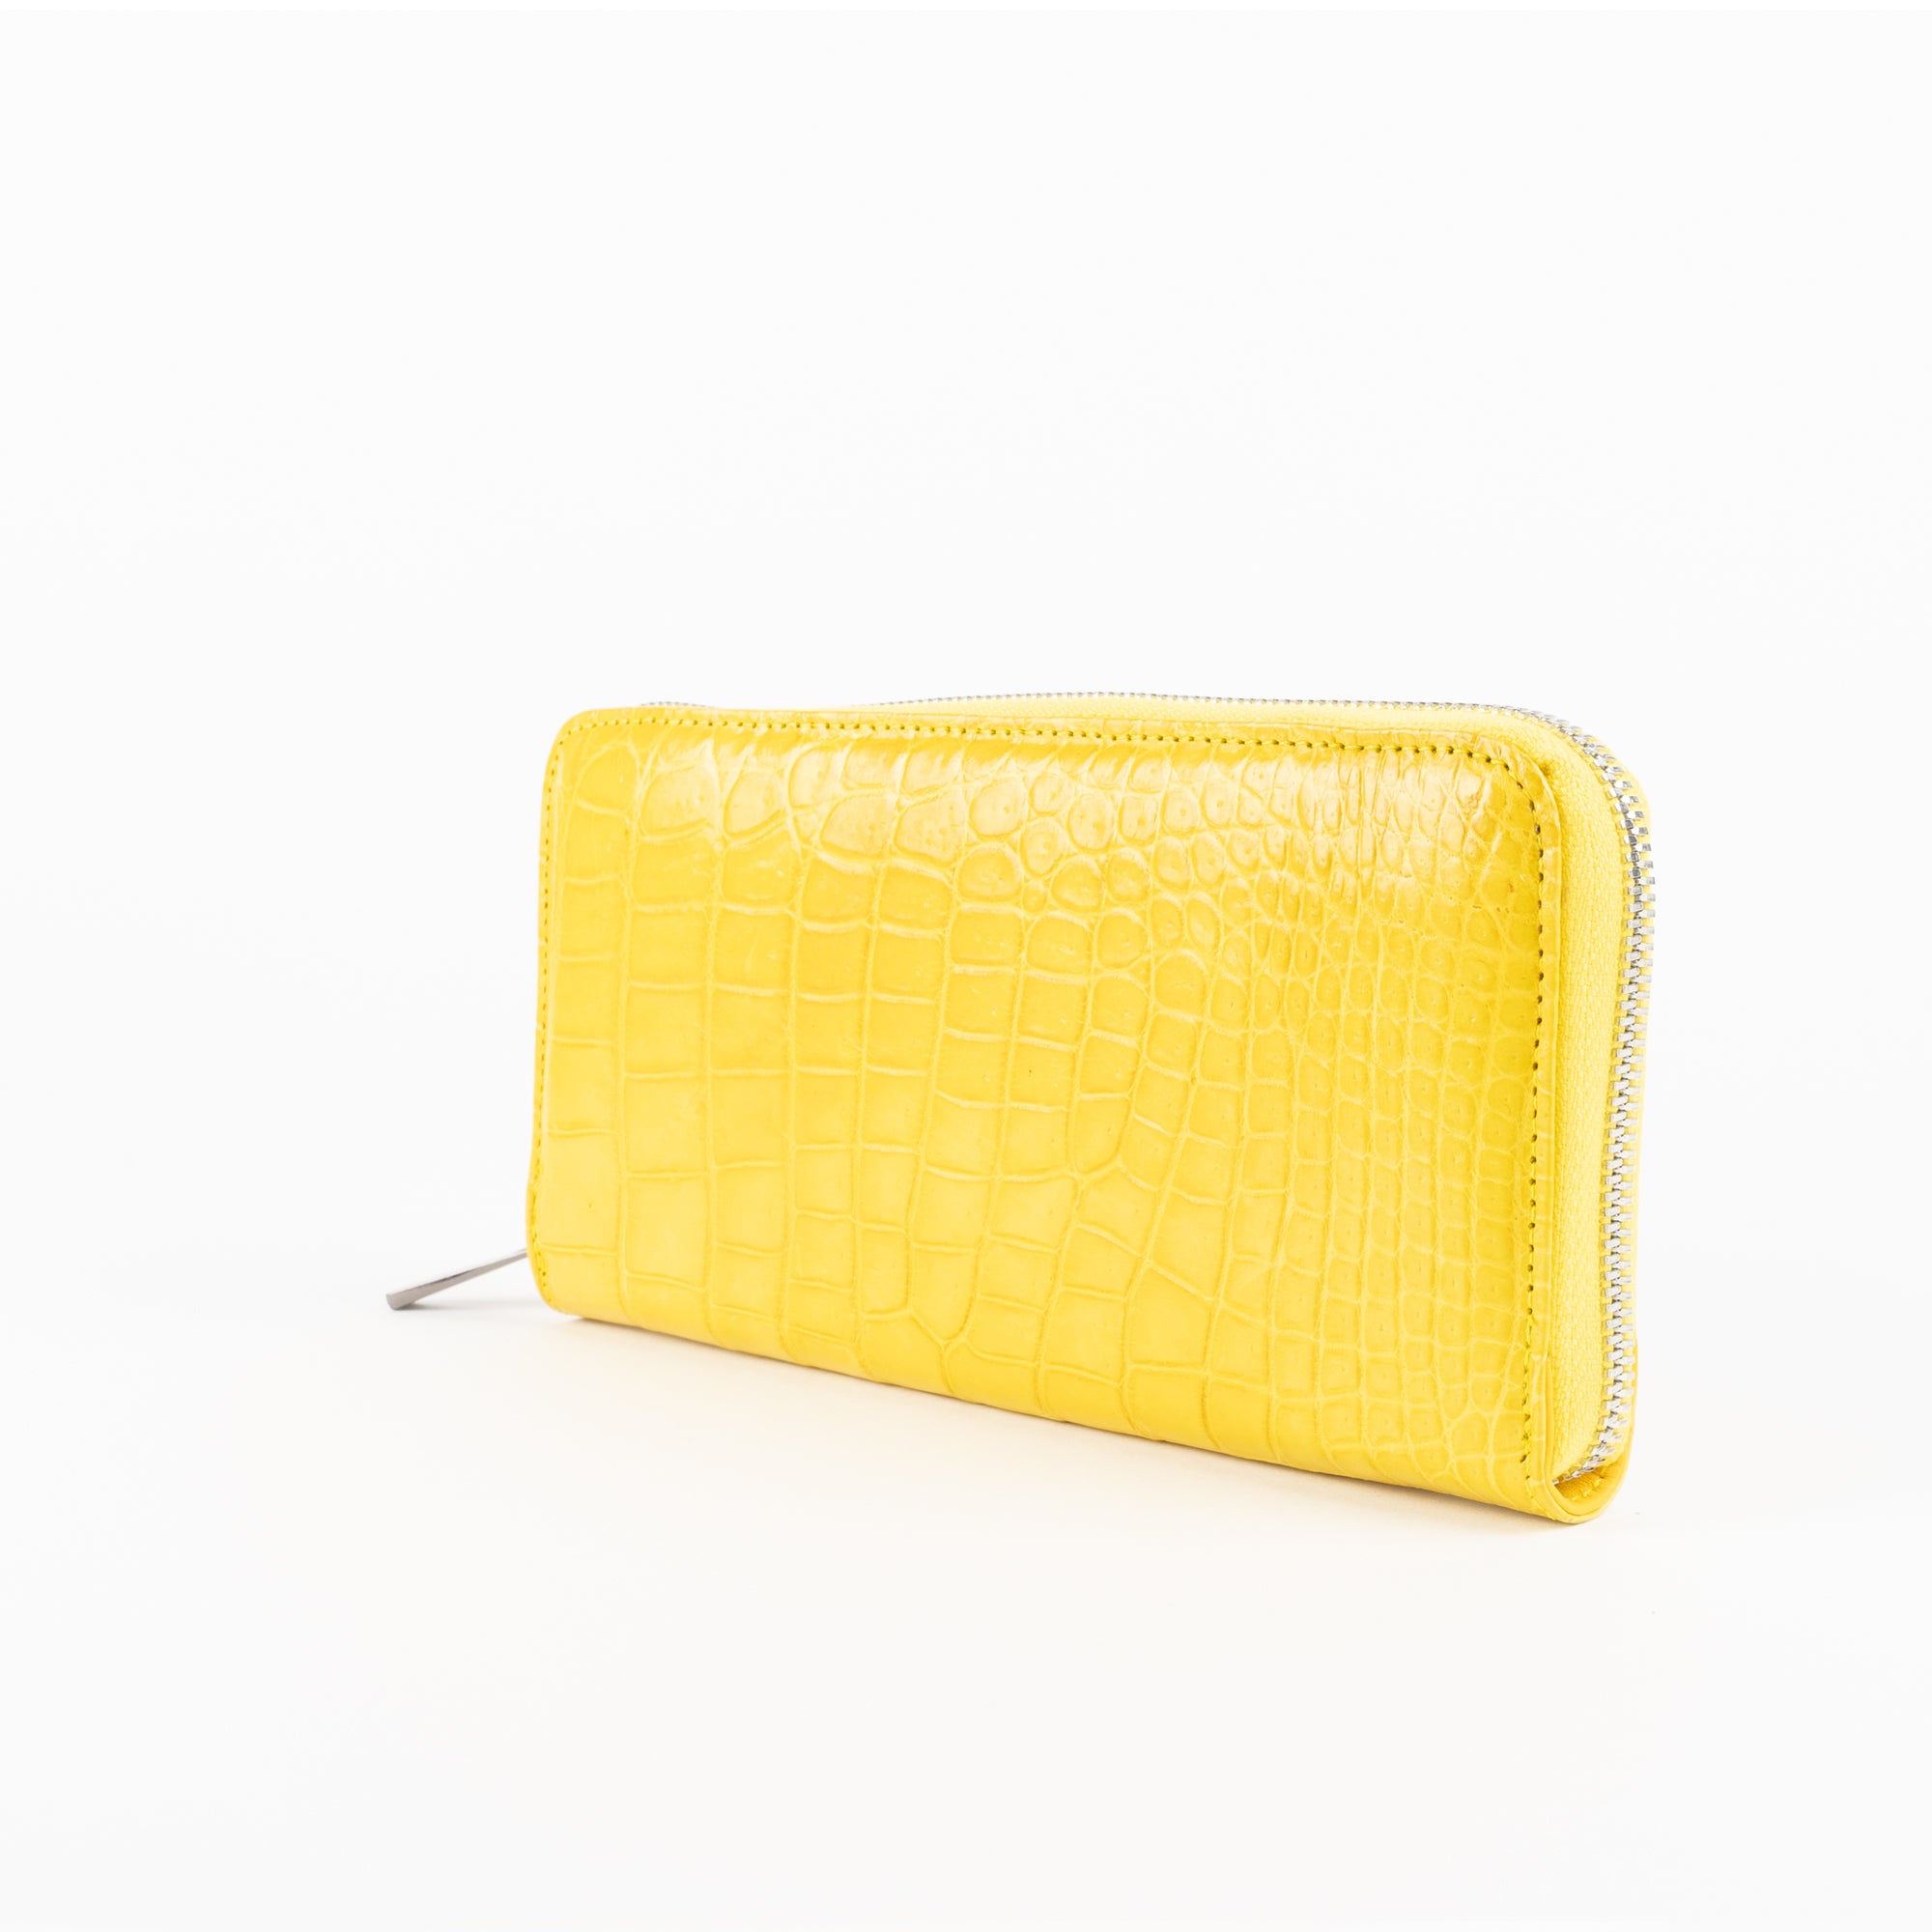 Designer Mini Flap Yellow Bag 10A Quality, 18cm Lambskin Quilted Lime Green  Purse With Wenge Wood Chain, Crossbody And Shoulder Options, Luxury Handbag  With Box From Guccibb1688, $304.25 | DHgate.Com